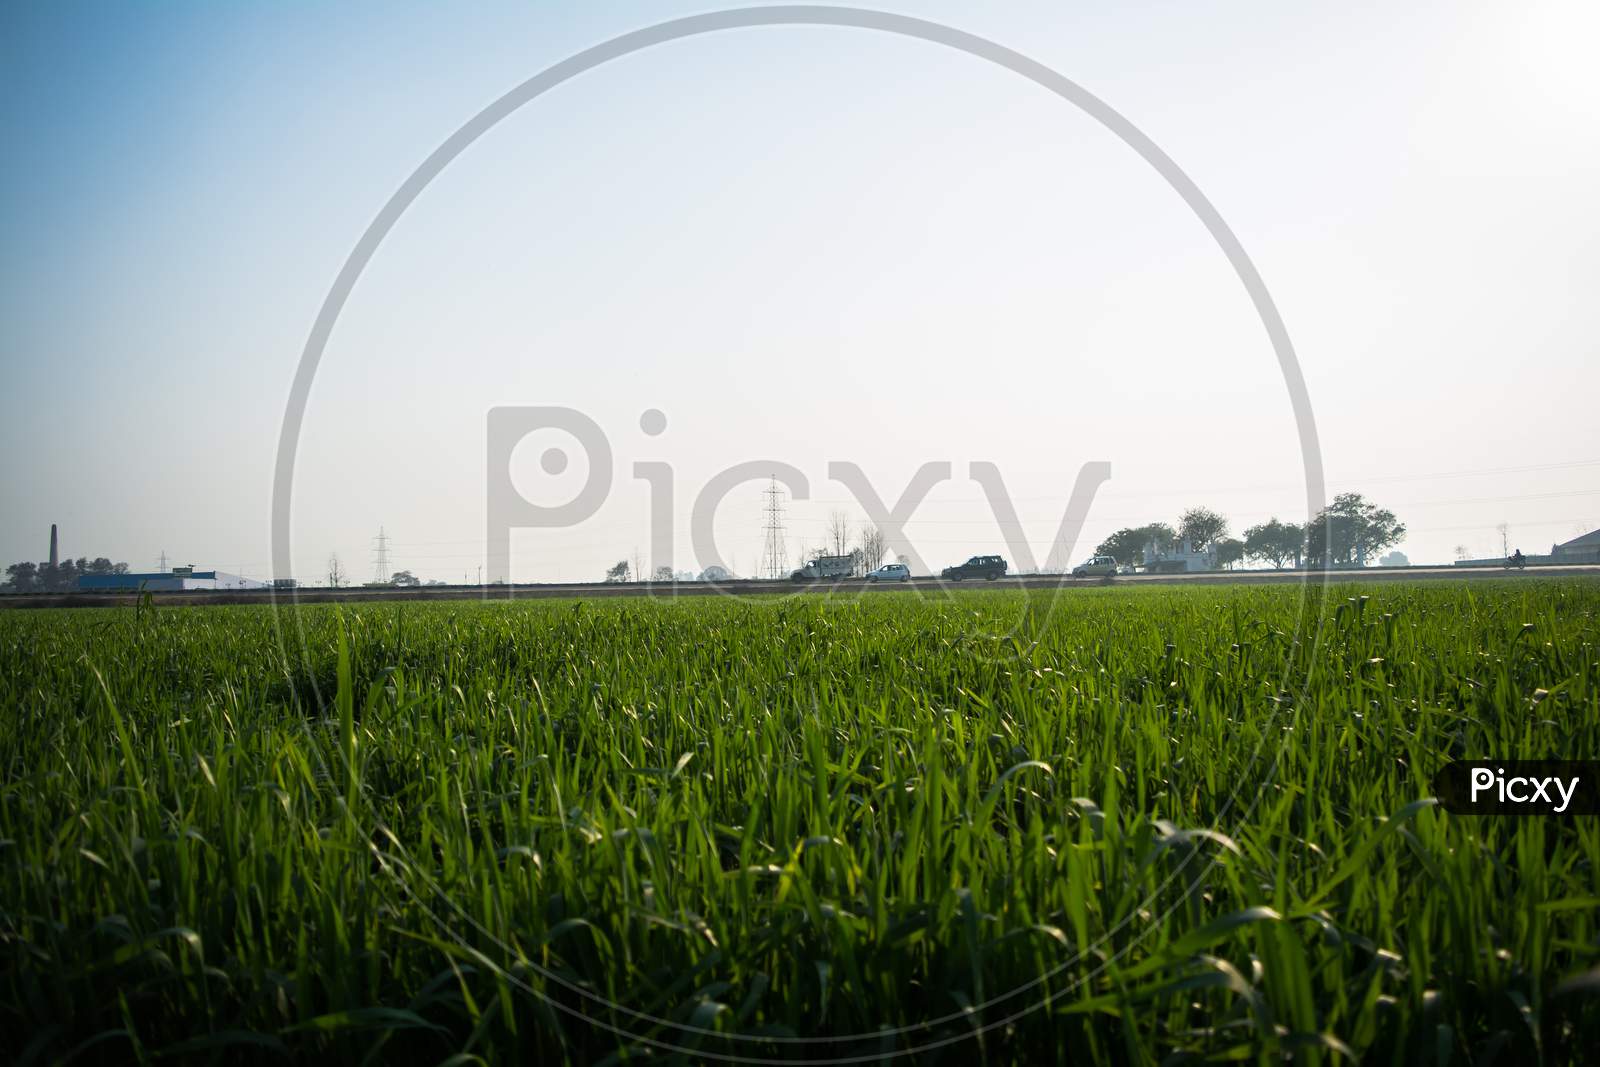 Field Of Young Wheat, Green Wheat Field With Clouds In India, Agricultural Field Landscape